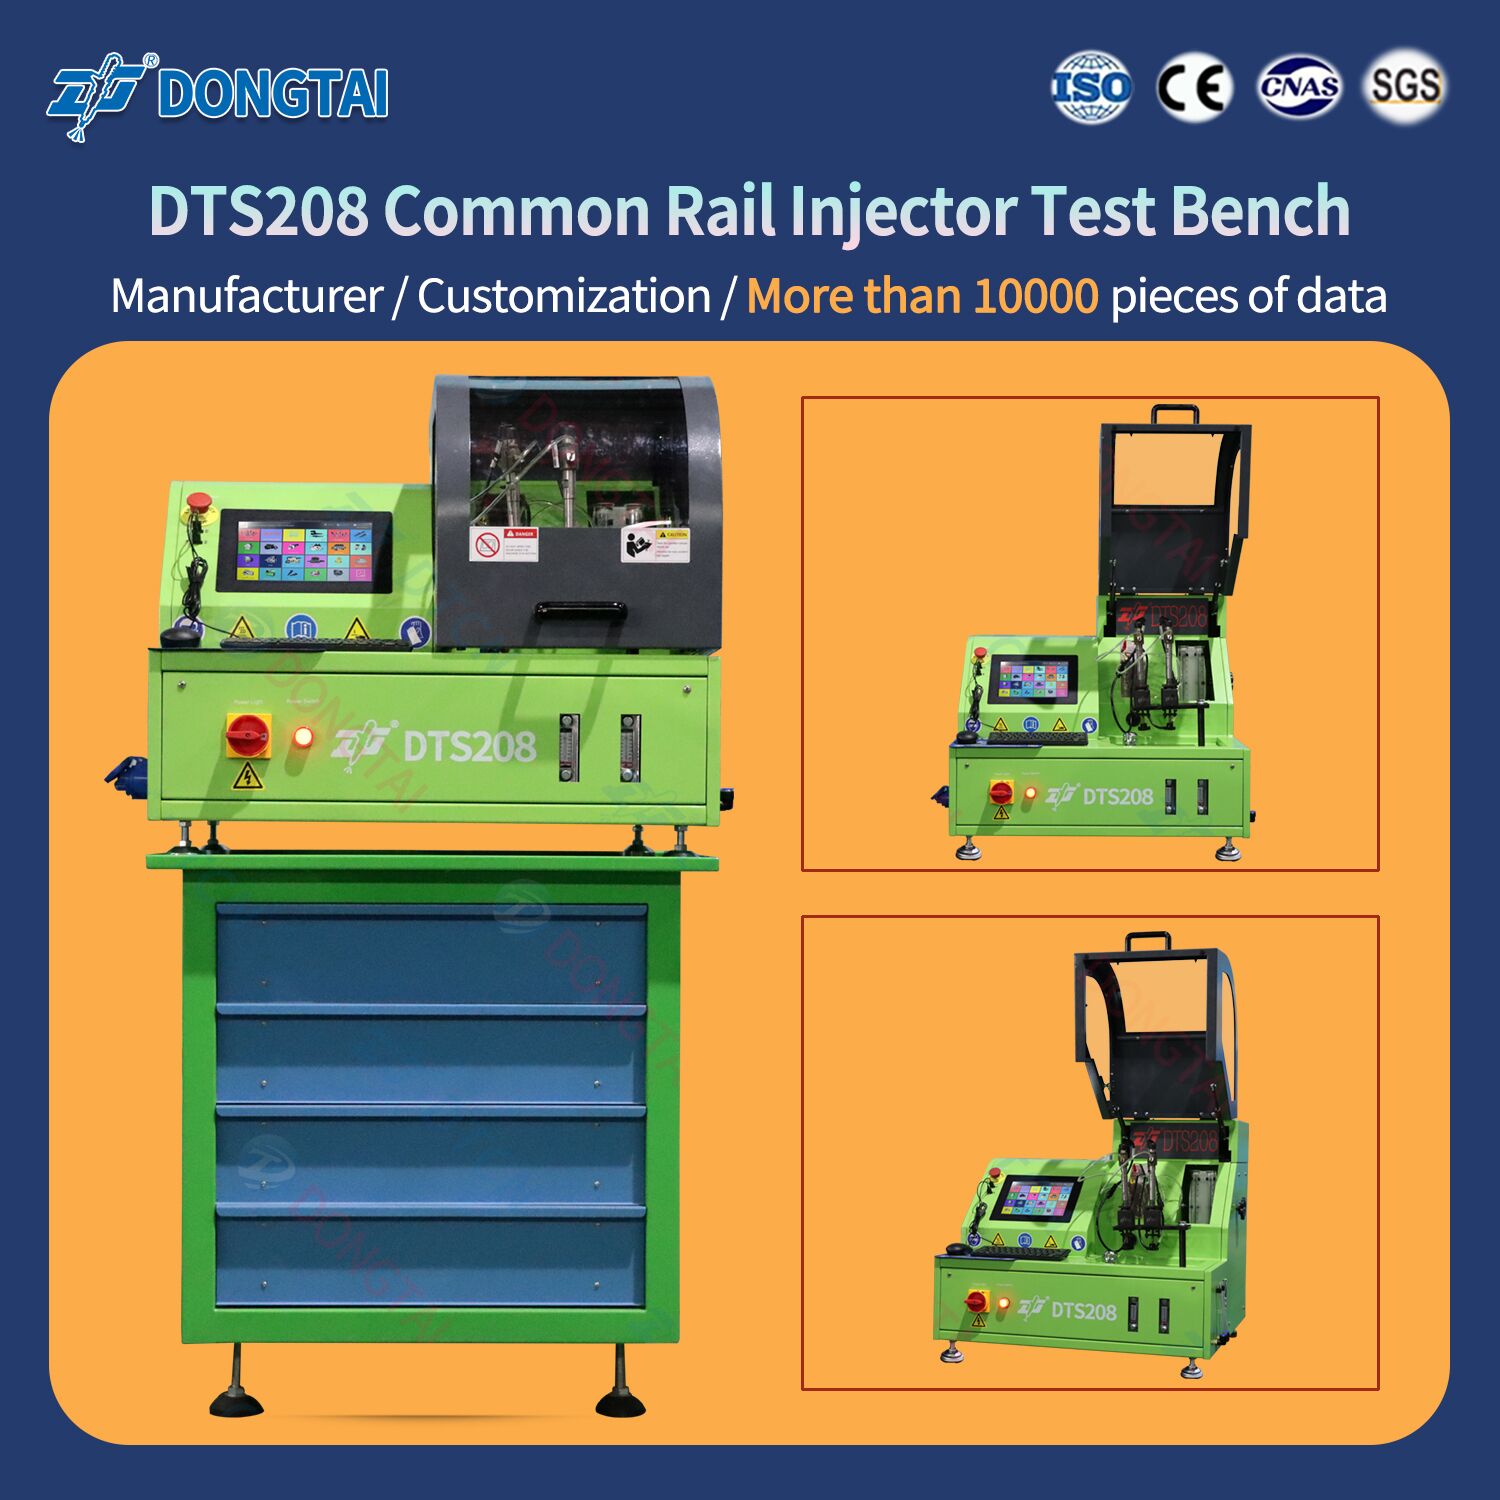 DTS208 common rail injector test bench